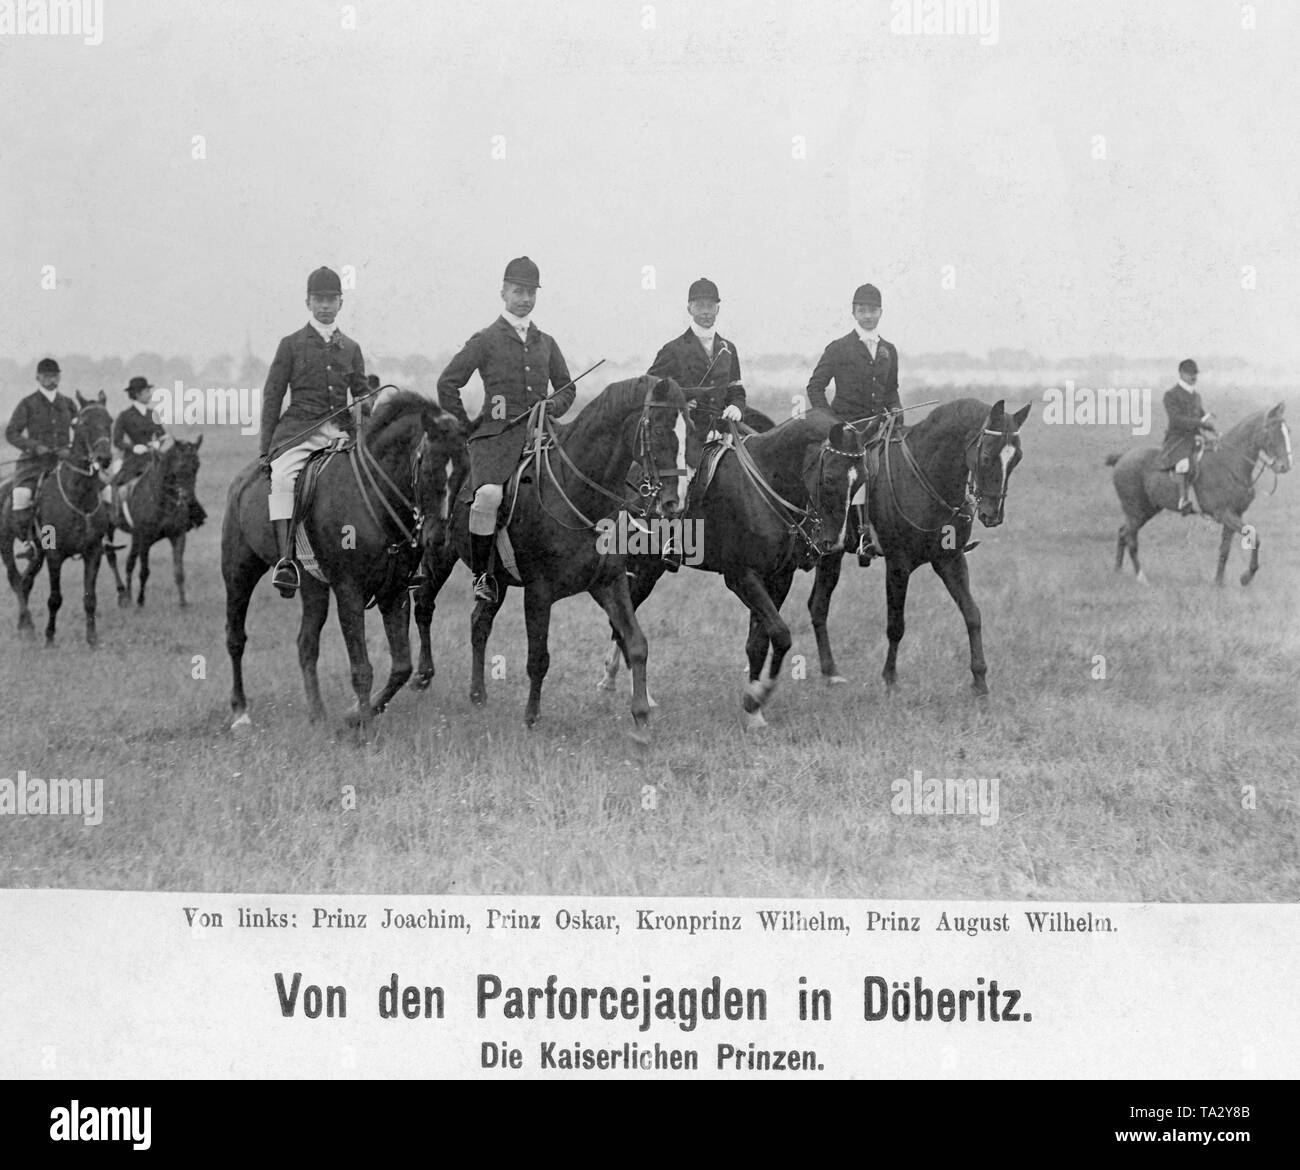 Crown Prince Wilhelm with the imperial family on a par force hunt in Doeberitz near Berlin. From left: Prince Joachim of Prussia, Prince Oskar of Prussia, Crown Prince Wilhelm of Prussia, Prince August Wilhelm of Prussia. Stock Photo